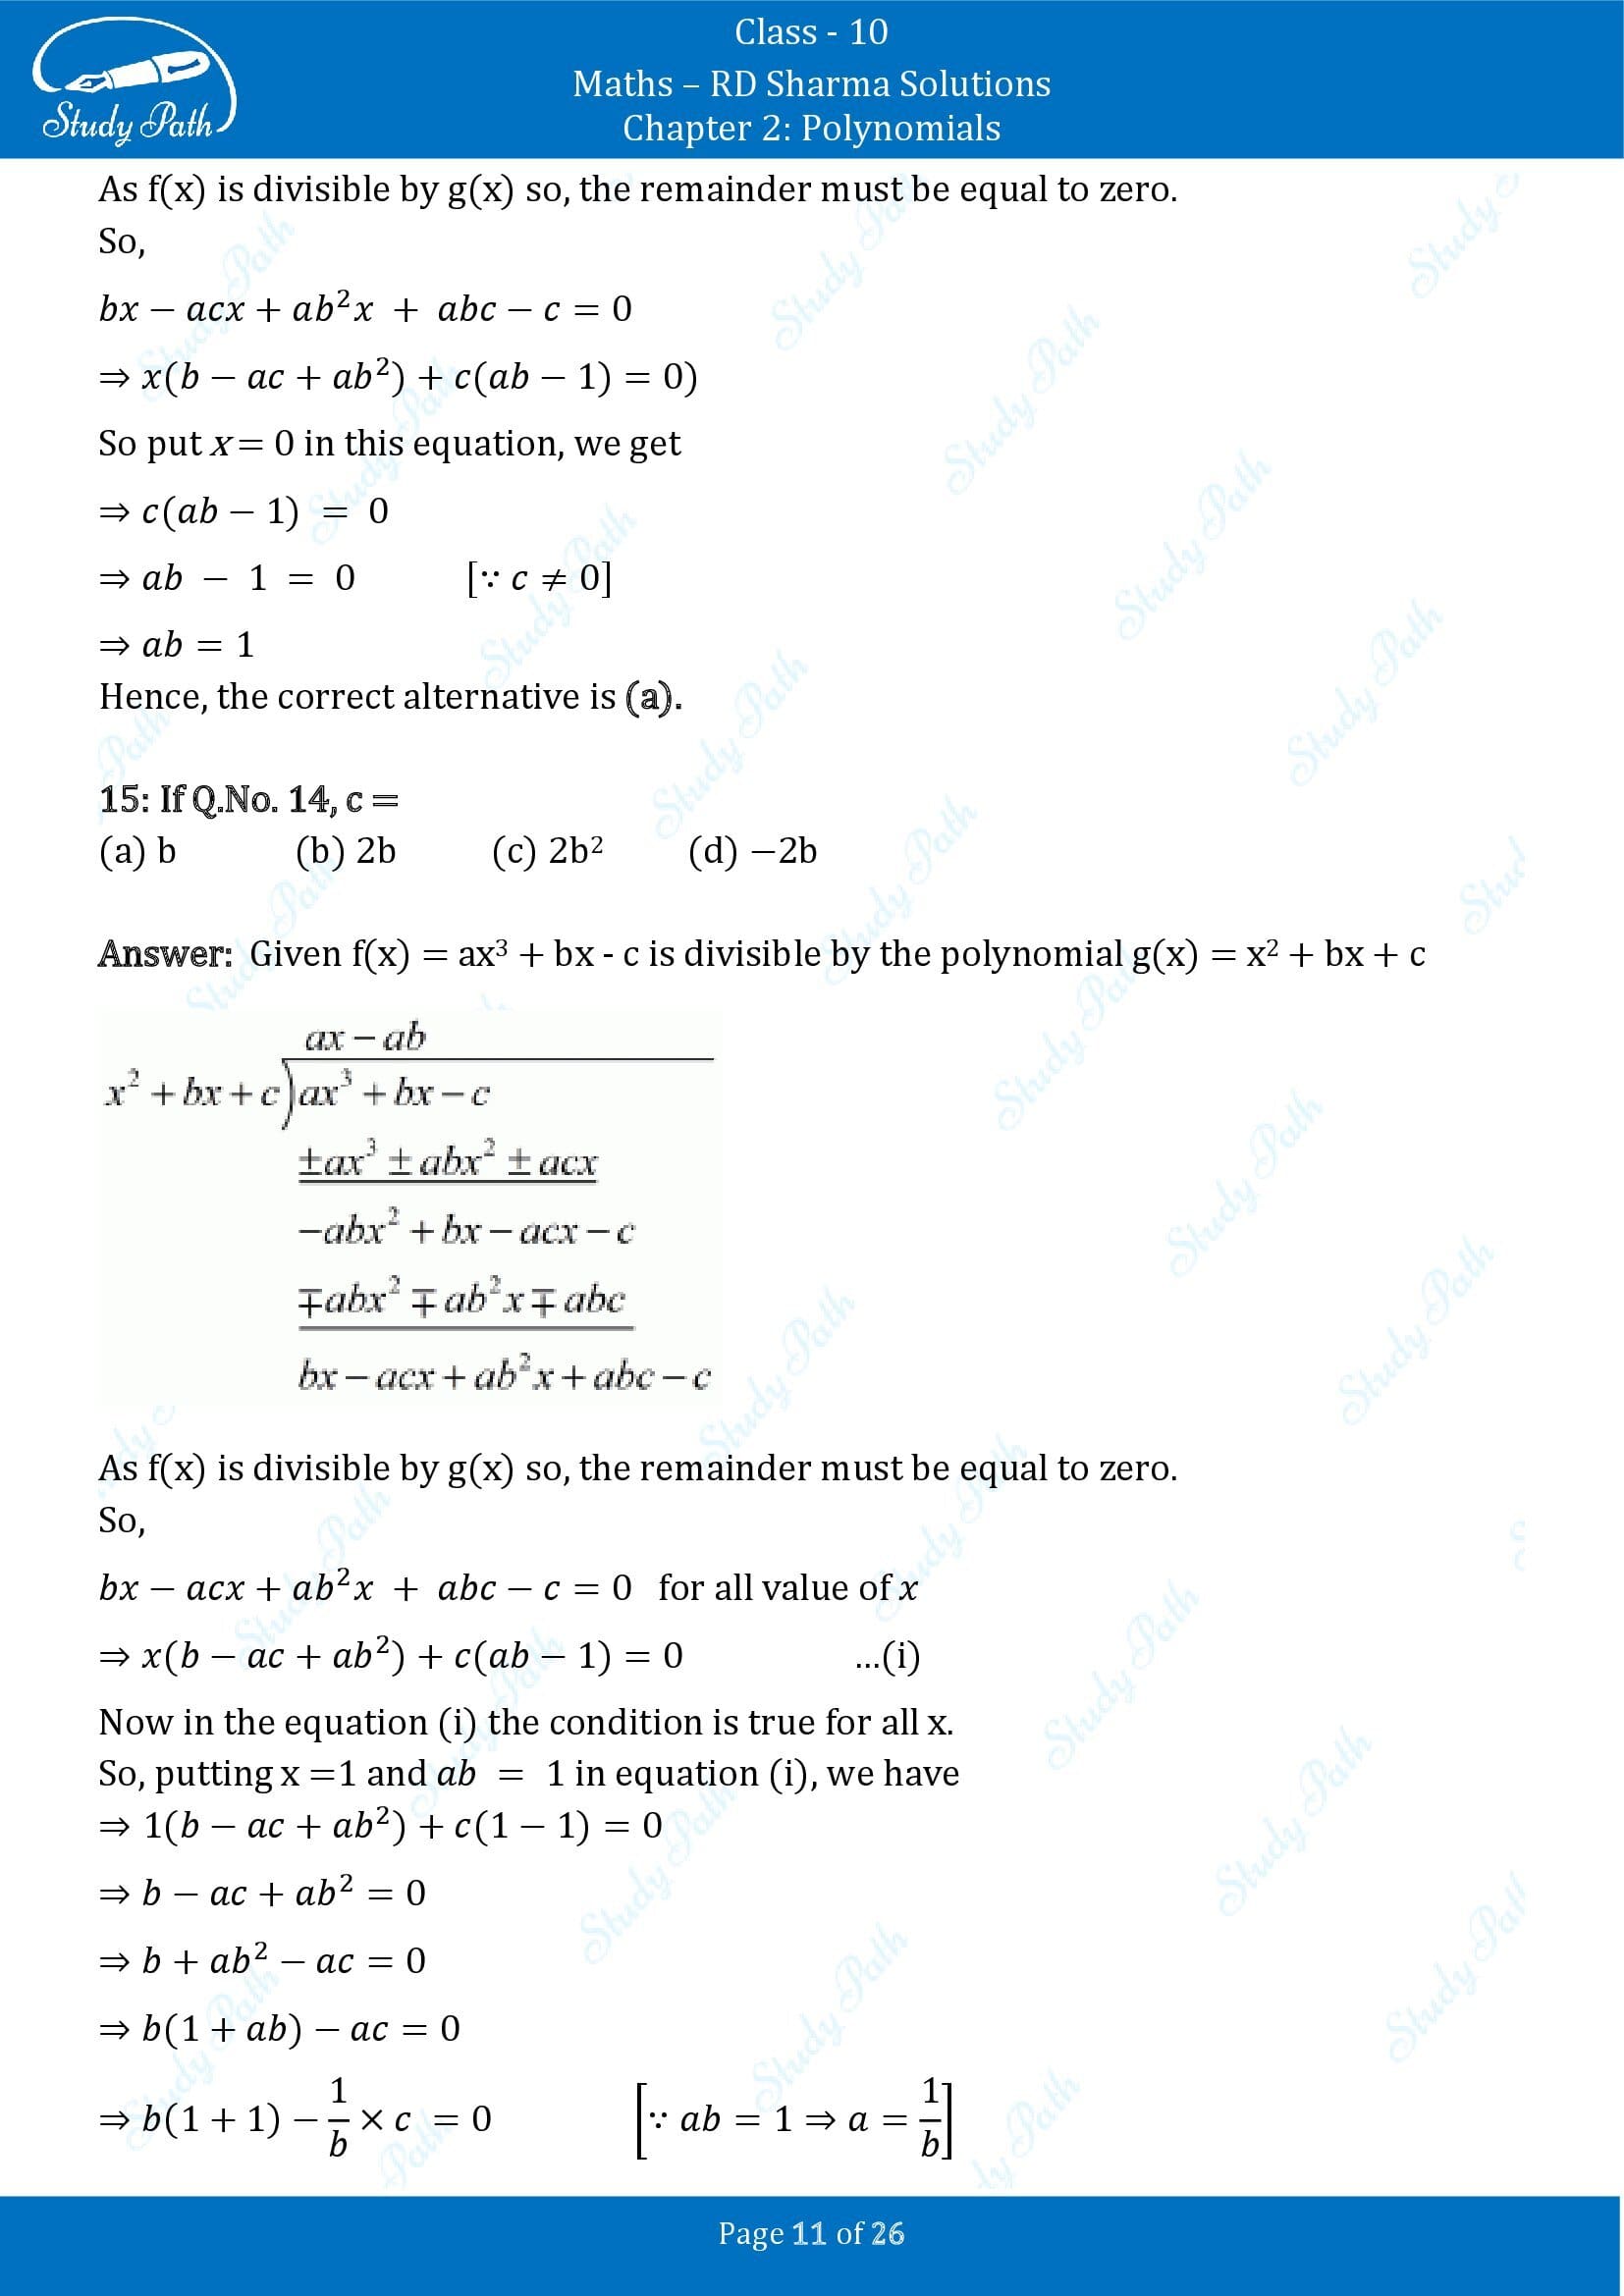 RD Sharma Solutions Class 10 Chapter 2 Polynomials Multiple Choice Questions MCQs 00011